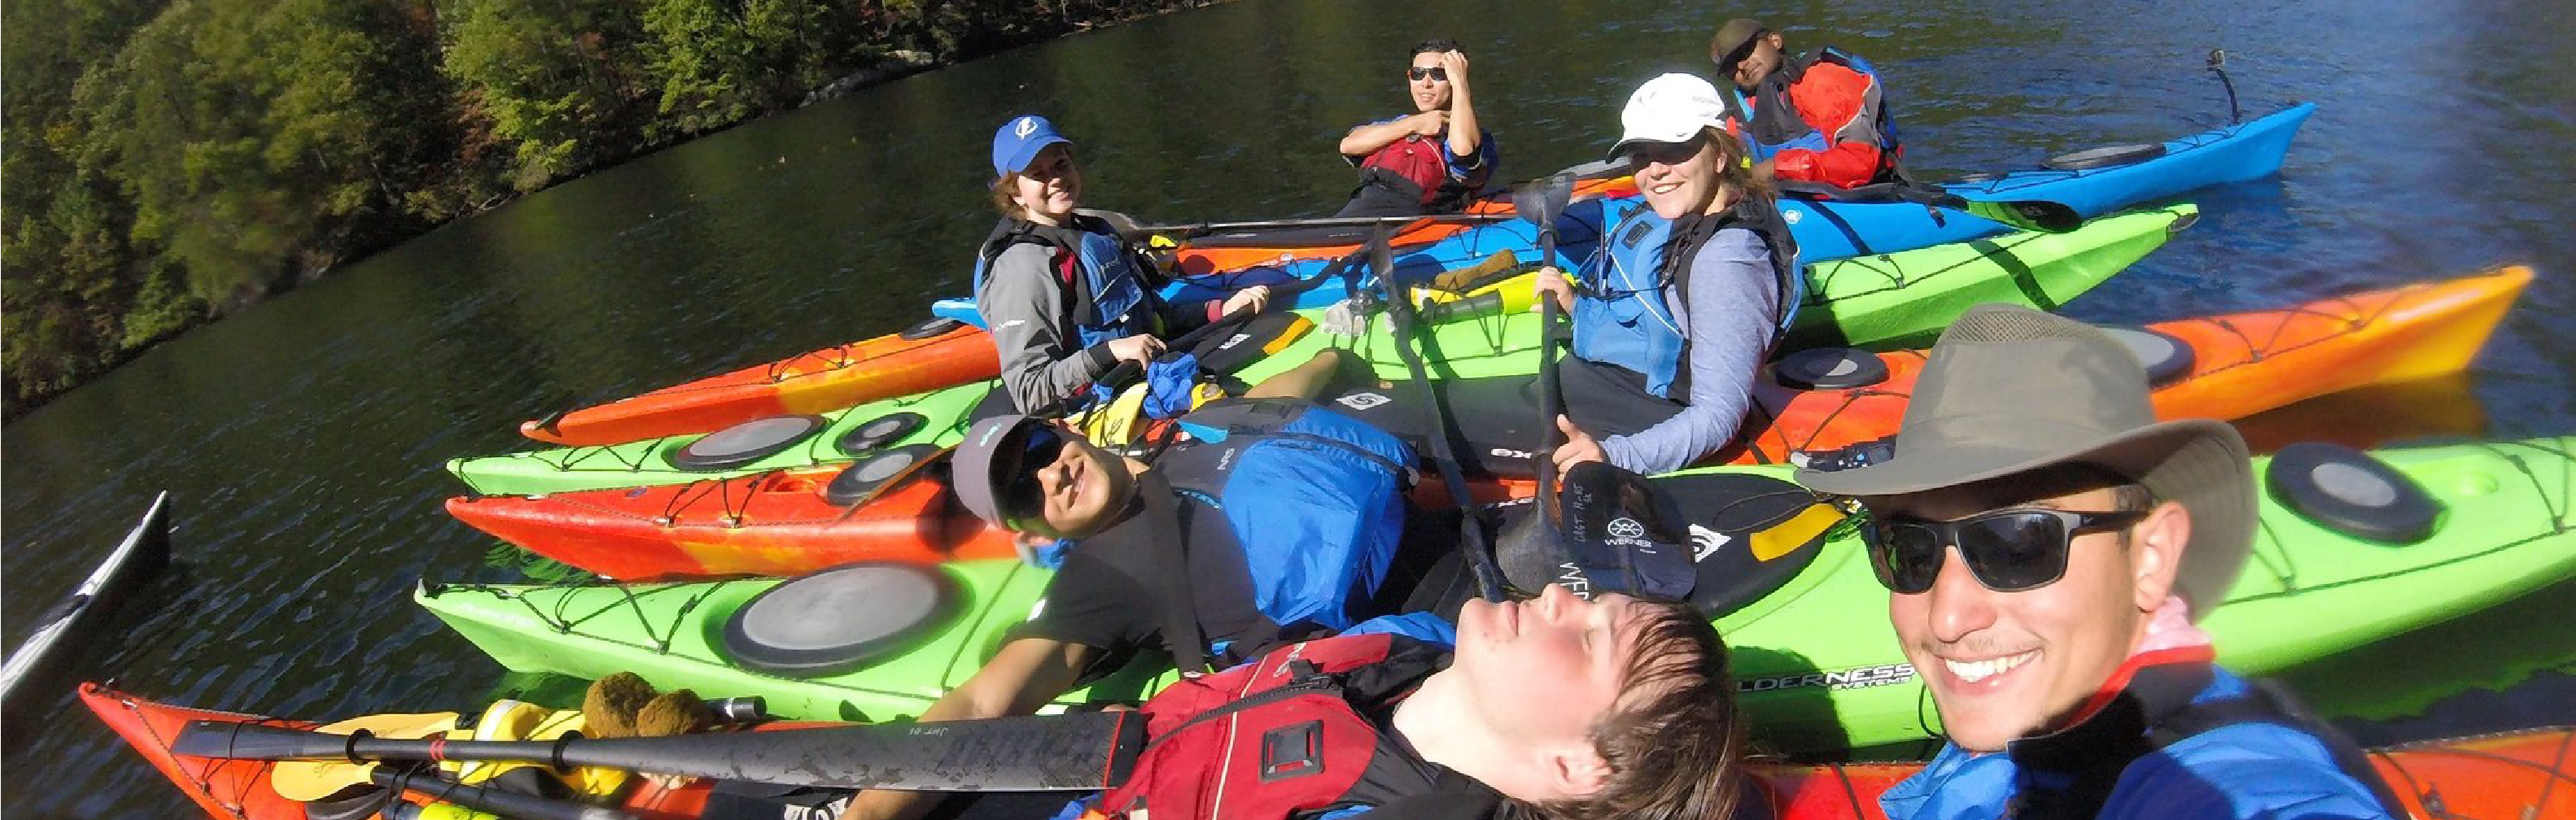 GT students canoeing